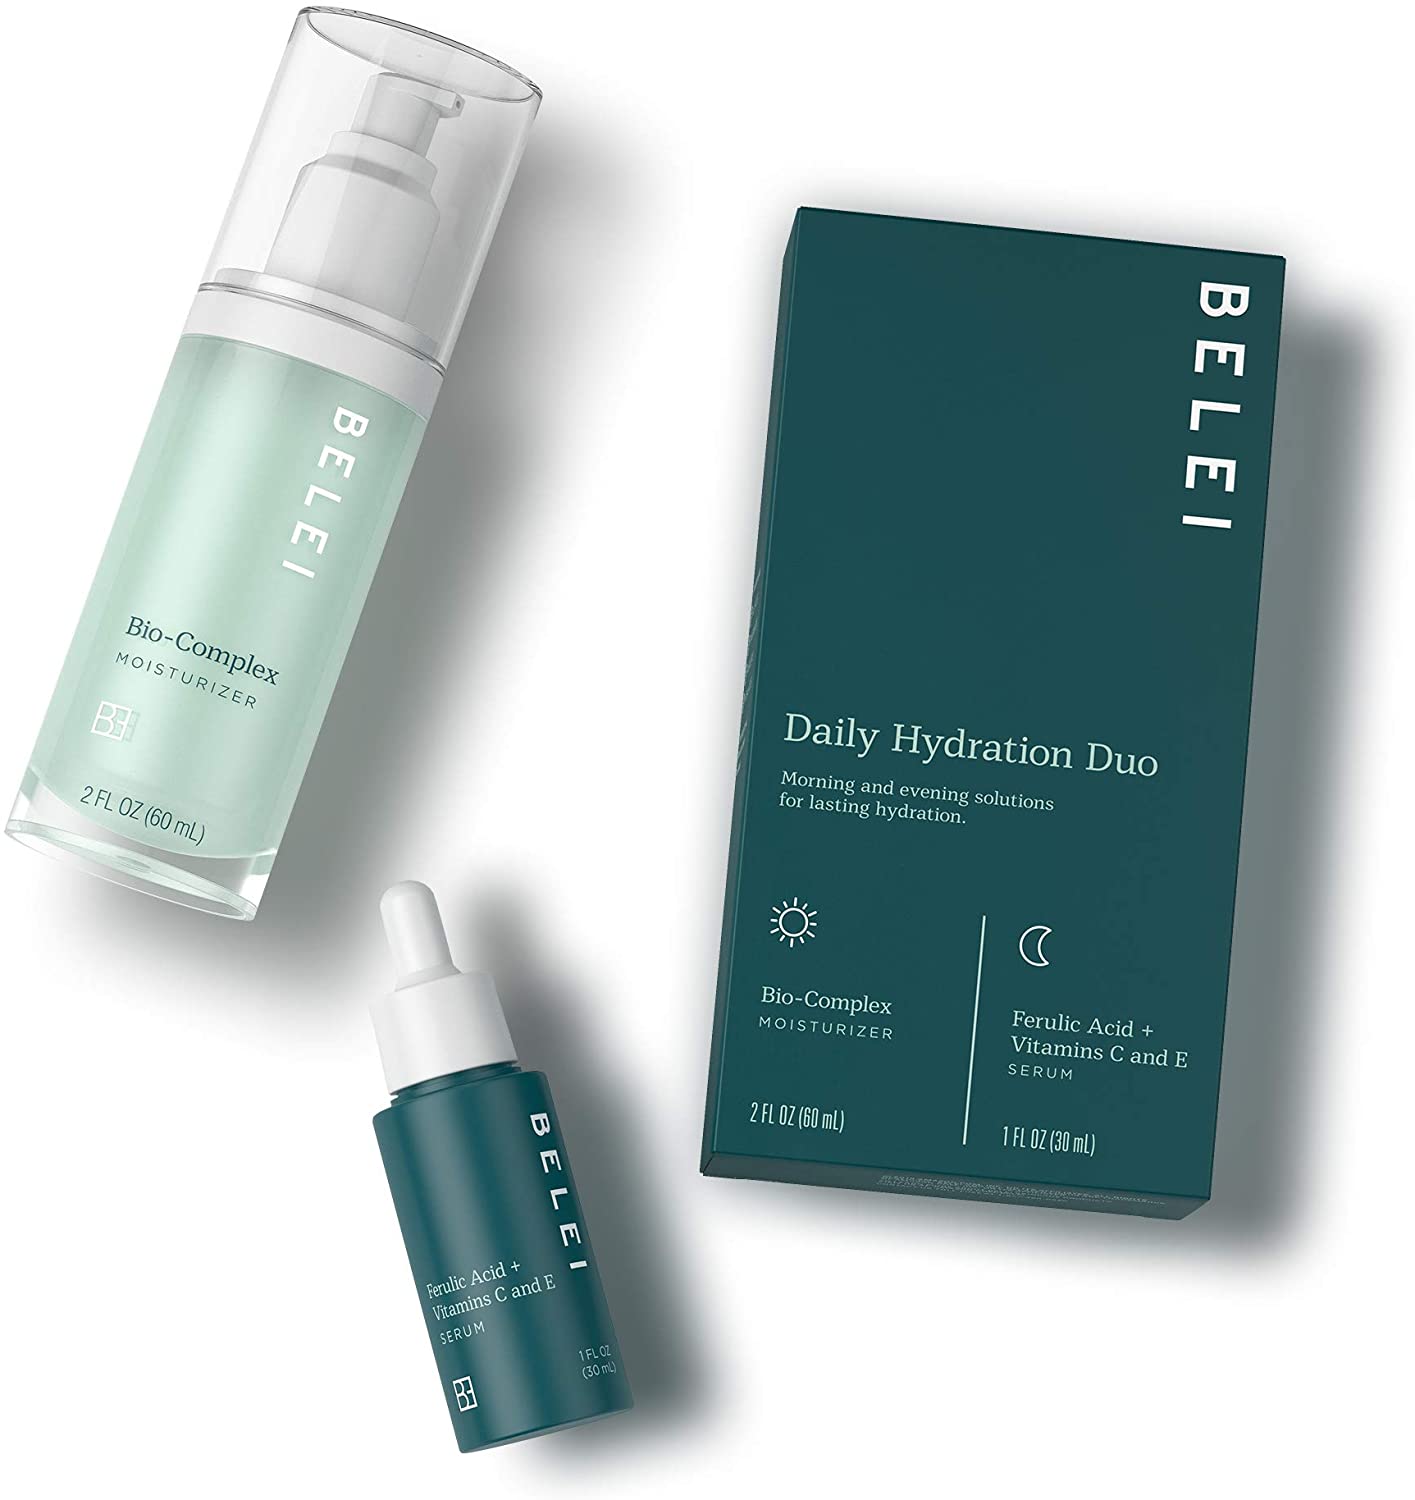 Belei: 'Daily Hydrating' Duo Skin Care Starter Kit (Bio-Complex Moisturizer and Ferulic Acid + Vitamins C & E) Helps with Fine Lines, Hydration, and Uneven Skin Tone